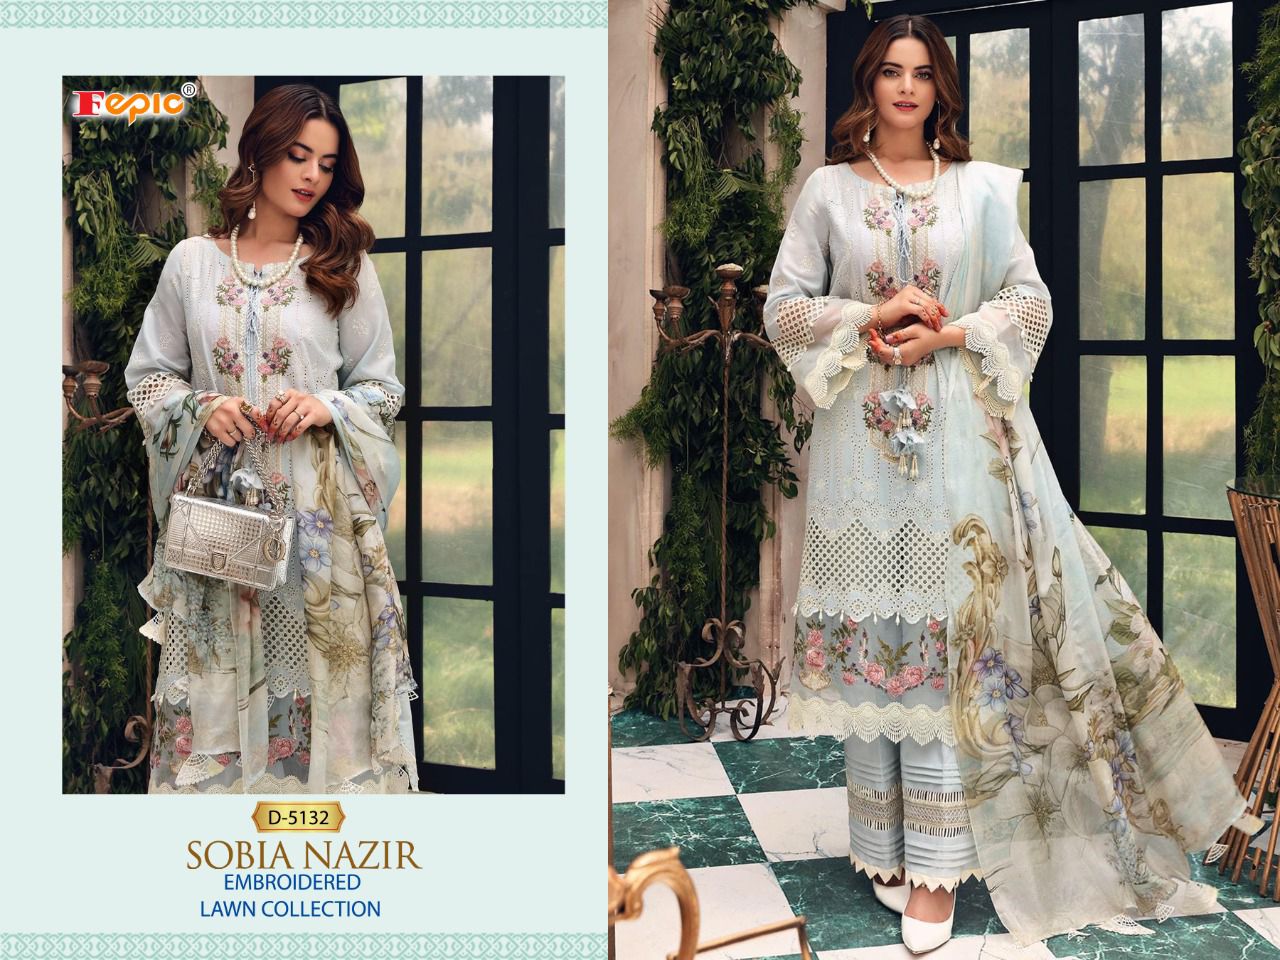 Fepic Rosemeen Sobia Nazir Lawn Collection 5132